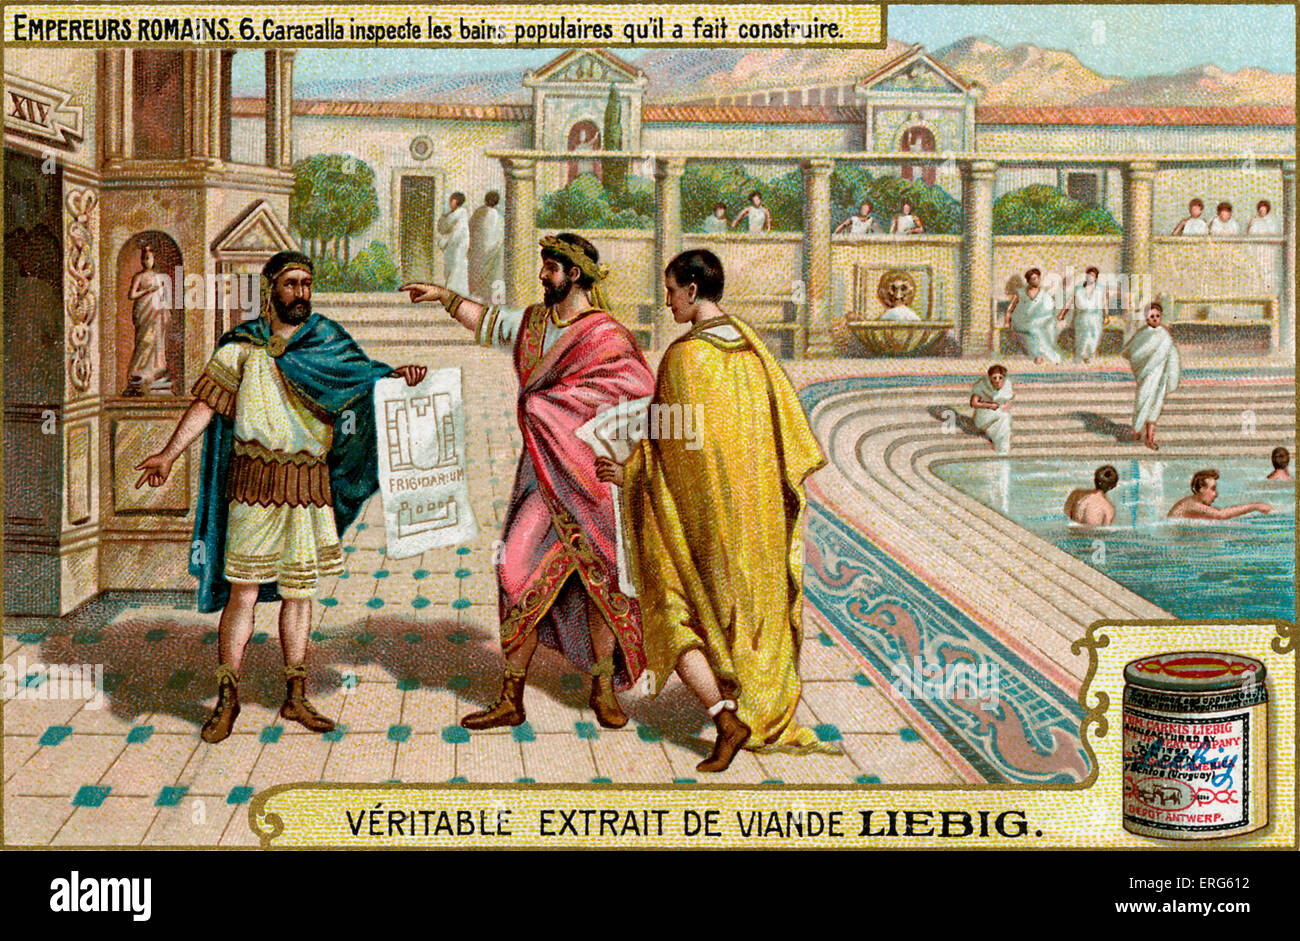 Roman Emperors - Liebig Meat Extract collectible card, 1907. Vignette depicting Caracalla inspecting the baths he had built Stock Photo